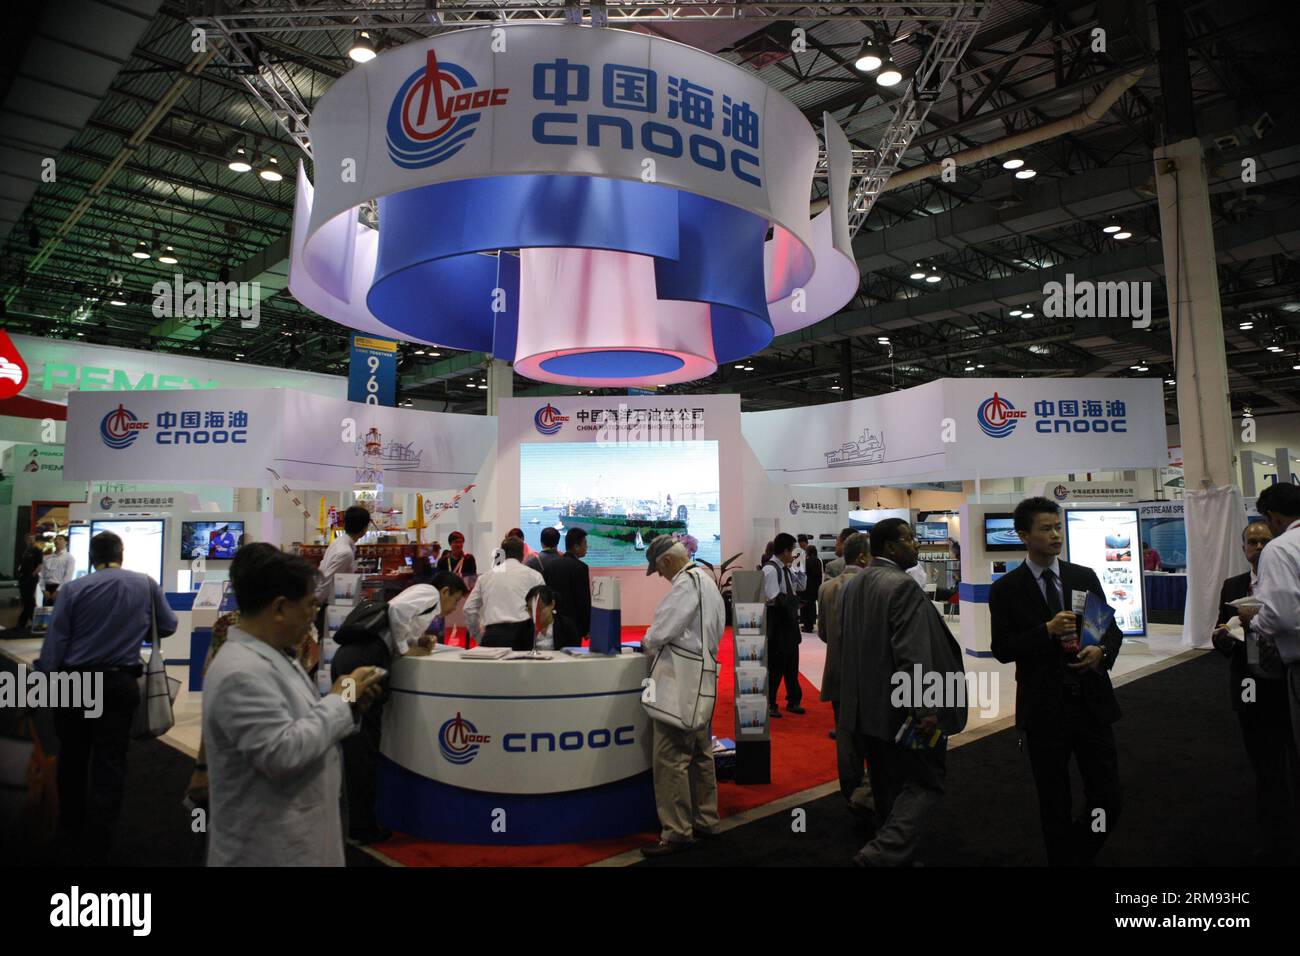 HOUSTON, May 5, 2014 (Xinhua) -- People visit the booth of China National Offshore Oil Corp. (CNOOC) at the Offshore Technology Conference (OTC) in Houston, the United States, May 5, 2014. More than 2,000 campanies from nearly 100 countries and regions participated in this 4-day conference which kicked off on May 5. (Xinhua/Song Qiong) (zhf) US-HOUSTON-OFFSHORE TECHNOLOGY CONFERENCE PUBLICATIONxNOTxINxCHN   Houston May 5 2014 XINHUA Celebrities Visit The Booth of China National Offshore Oil Corp CNOOC AT The Offshore Technology Conference OTC in Houston The United States May 5 2014 More than 2 Stock Photo